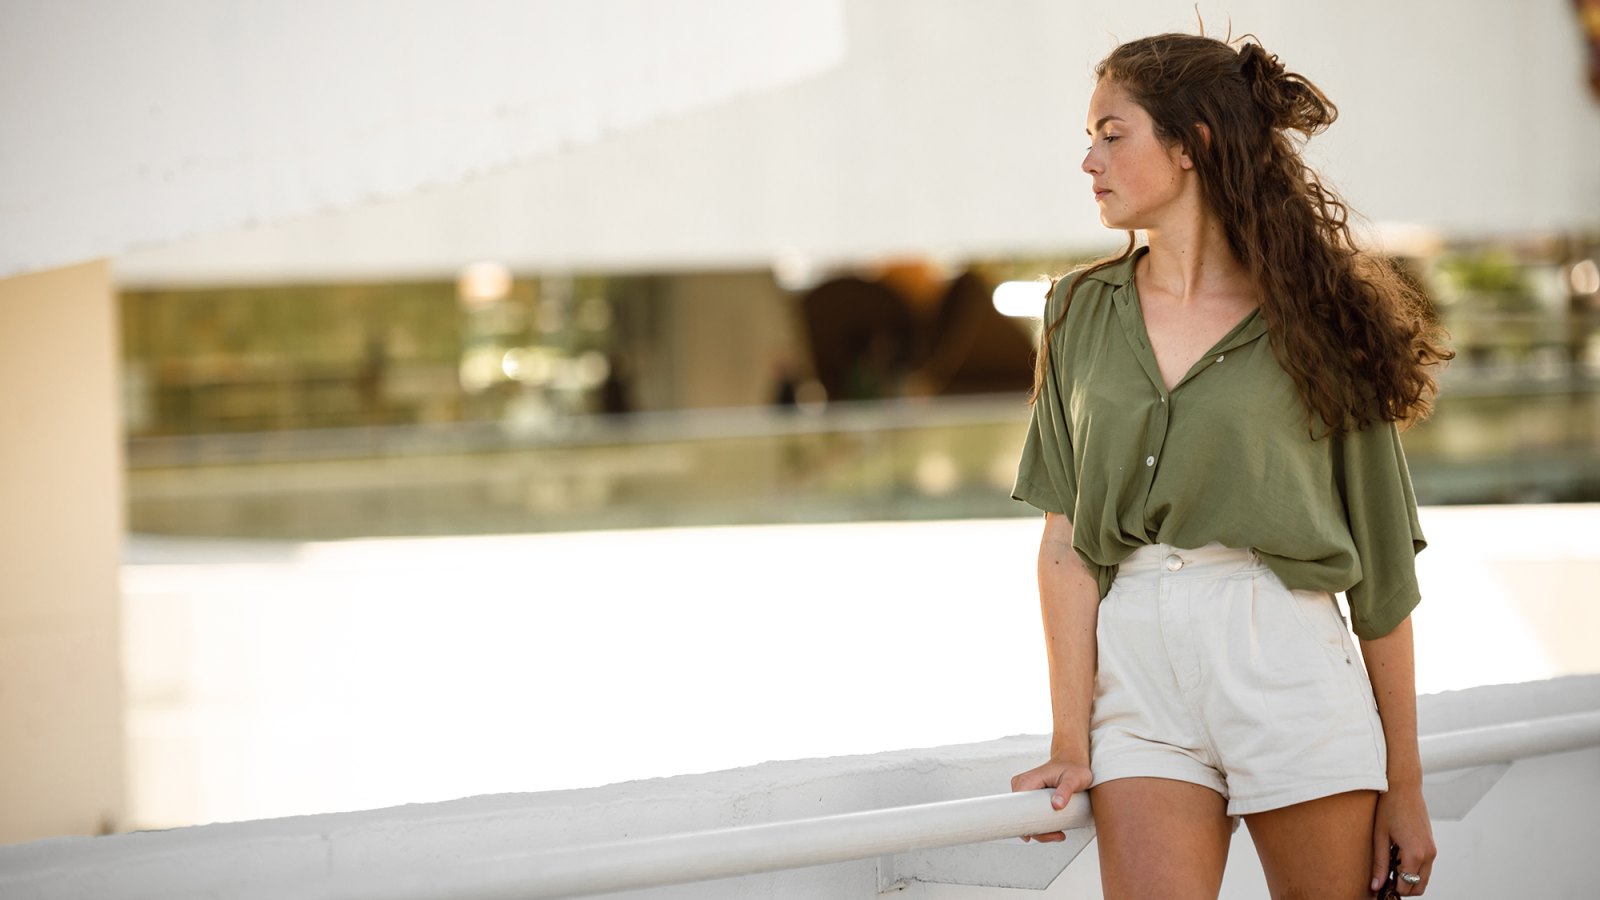 Portrait of a young adult woman, wearing a green t-shirt and a white shorts, leaning on a handrail and looking to her right.